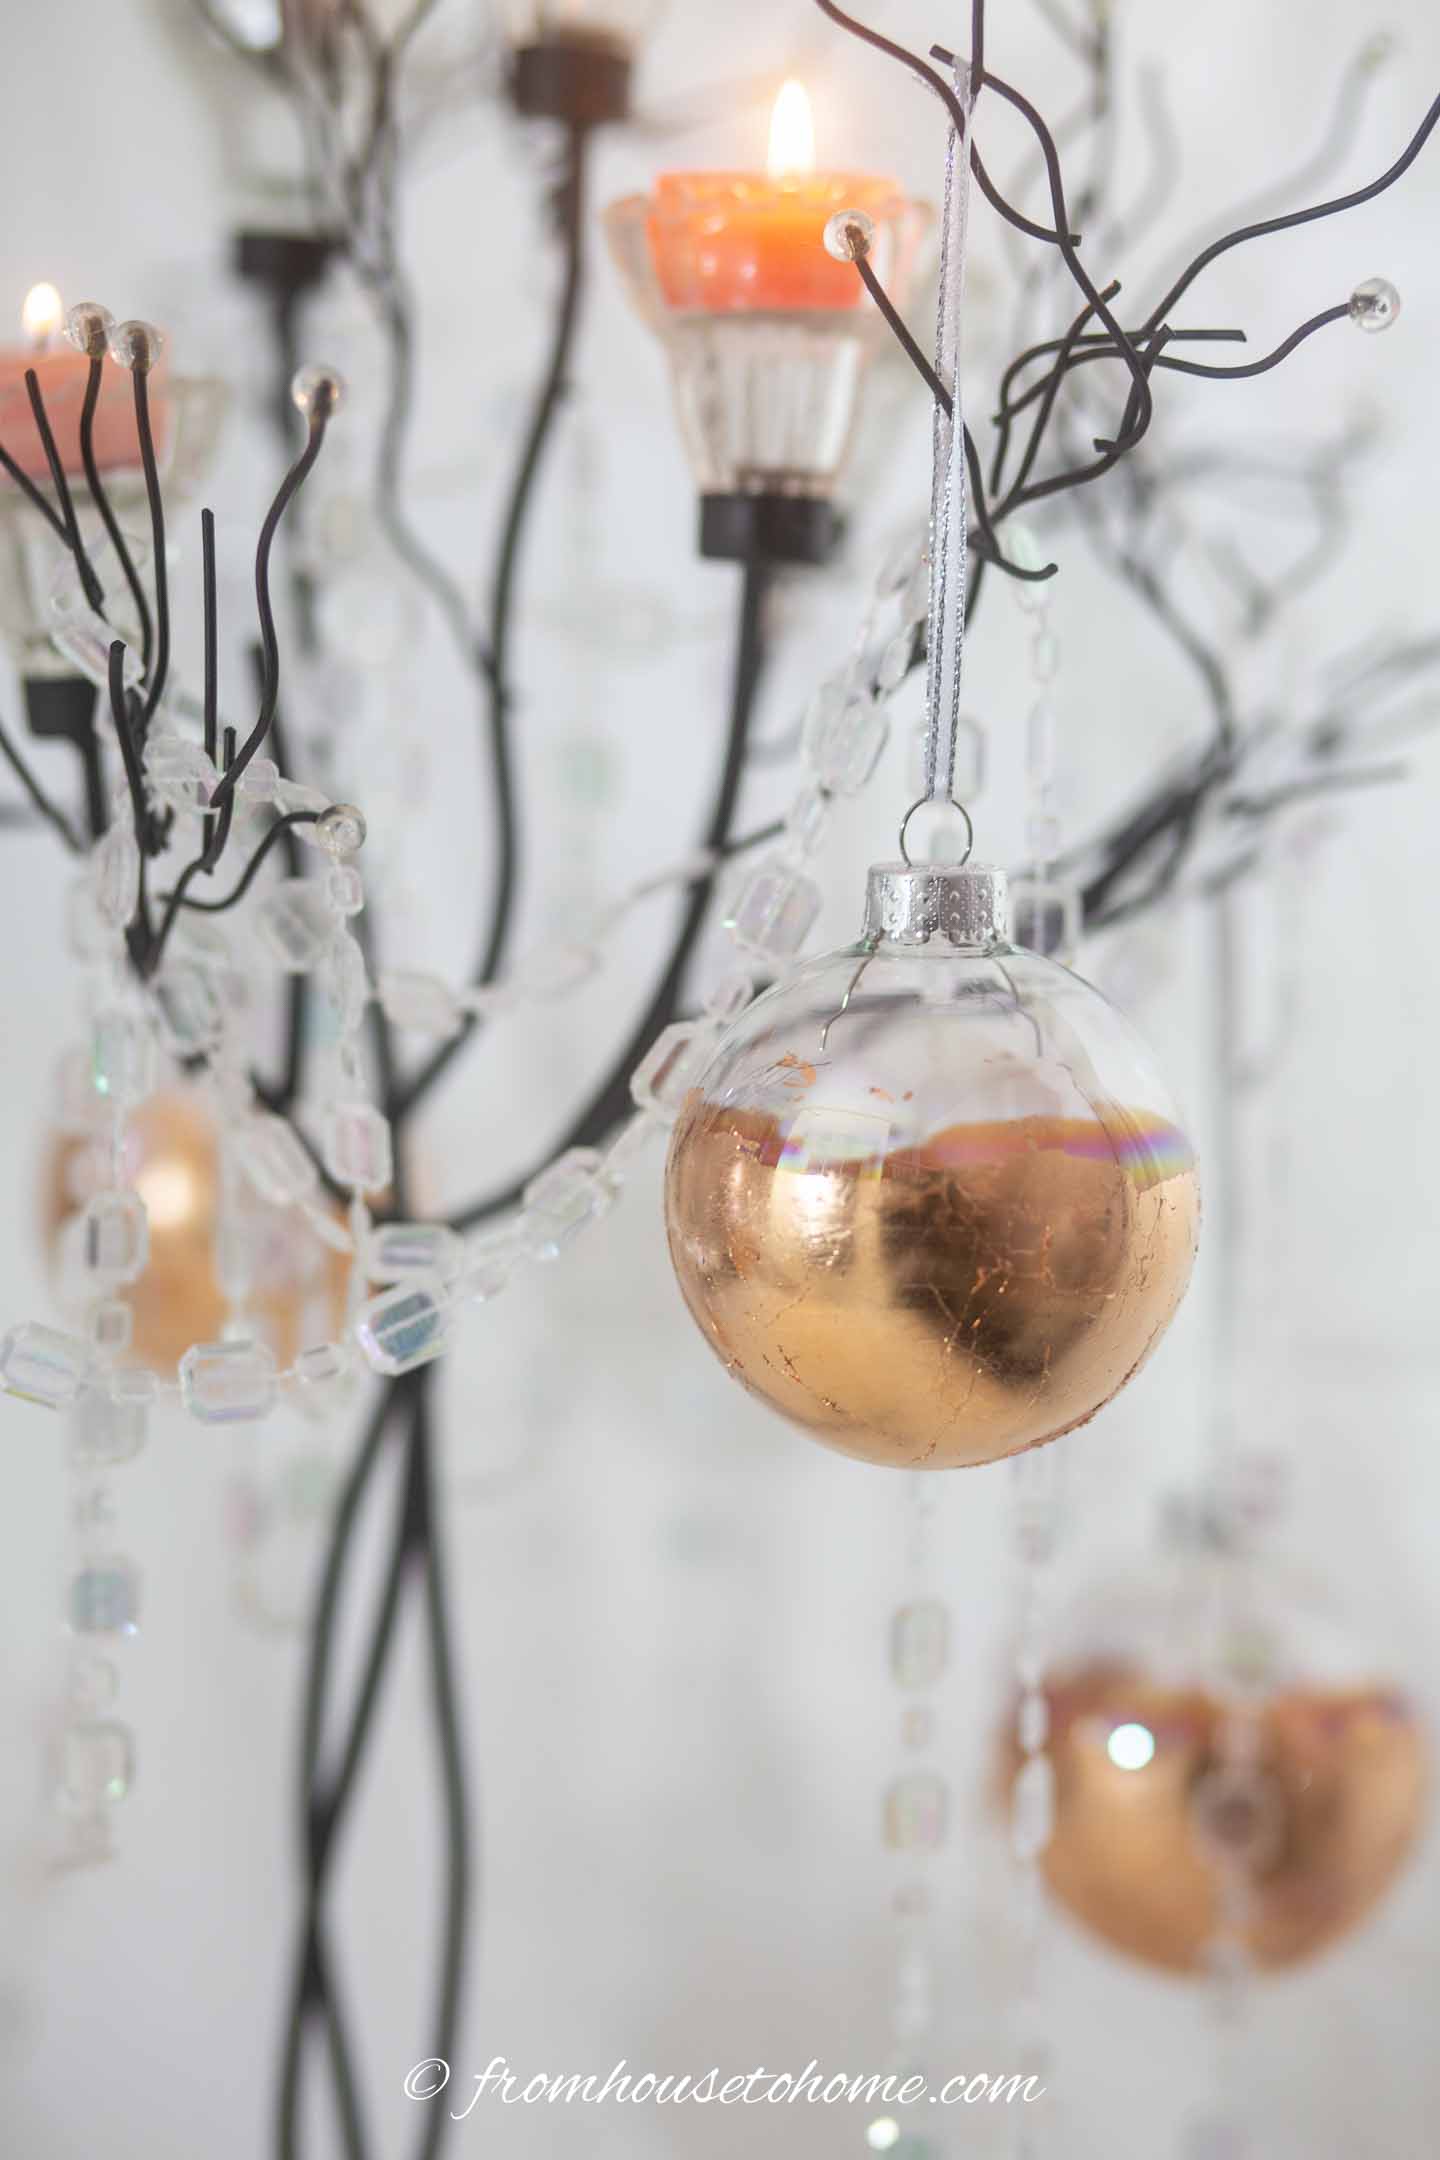 Twig Christmas tree decorated with DIY copper leaf ornaments